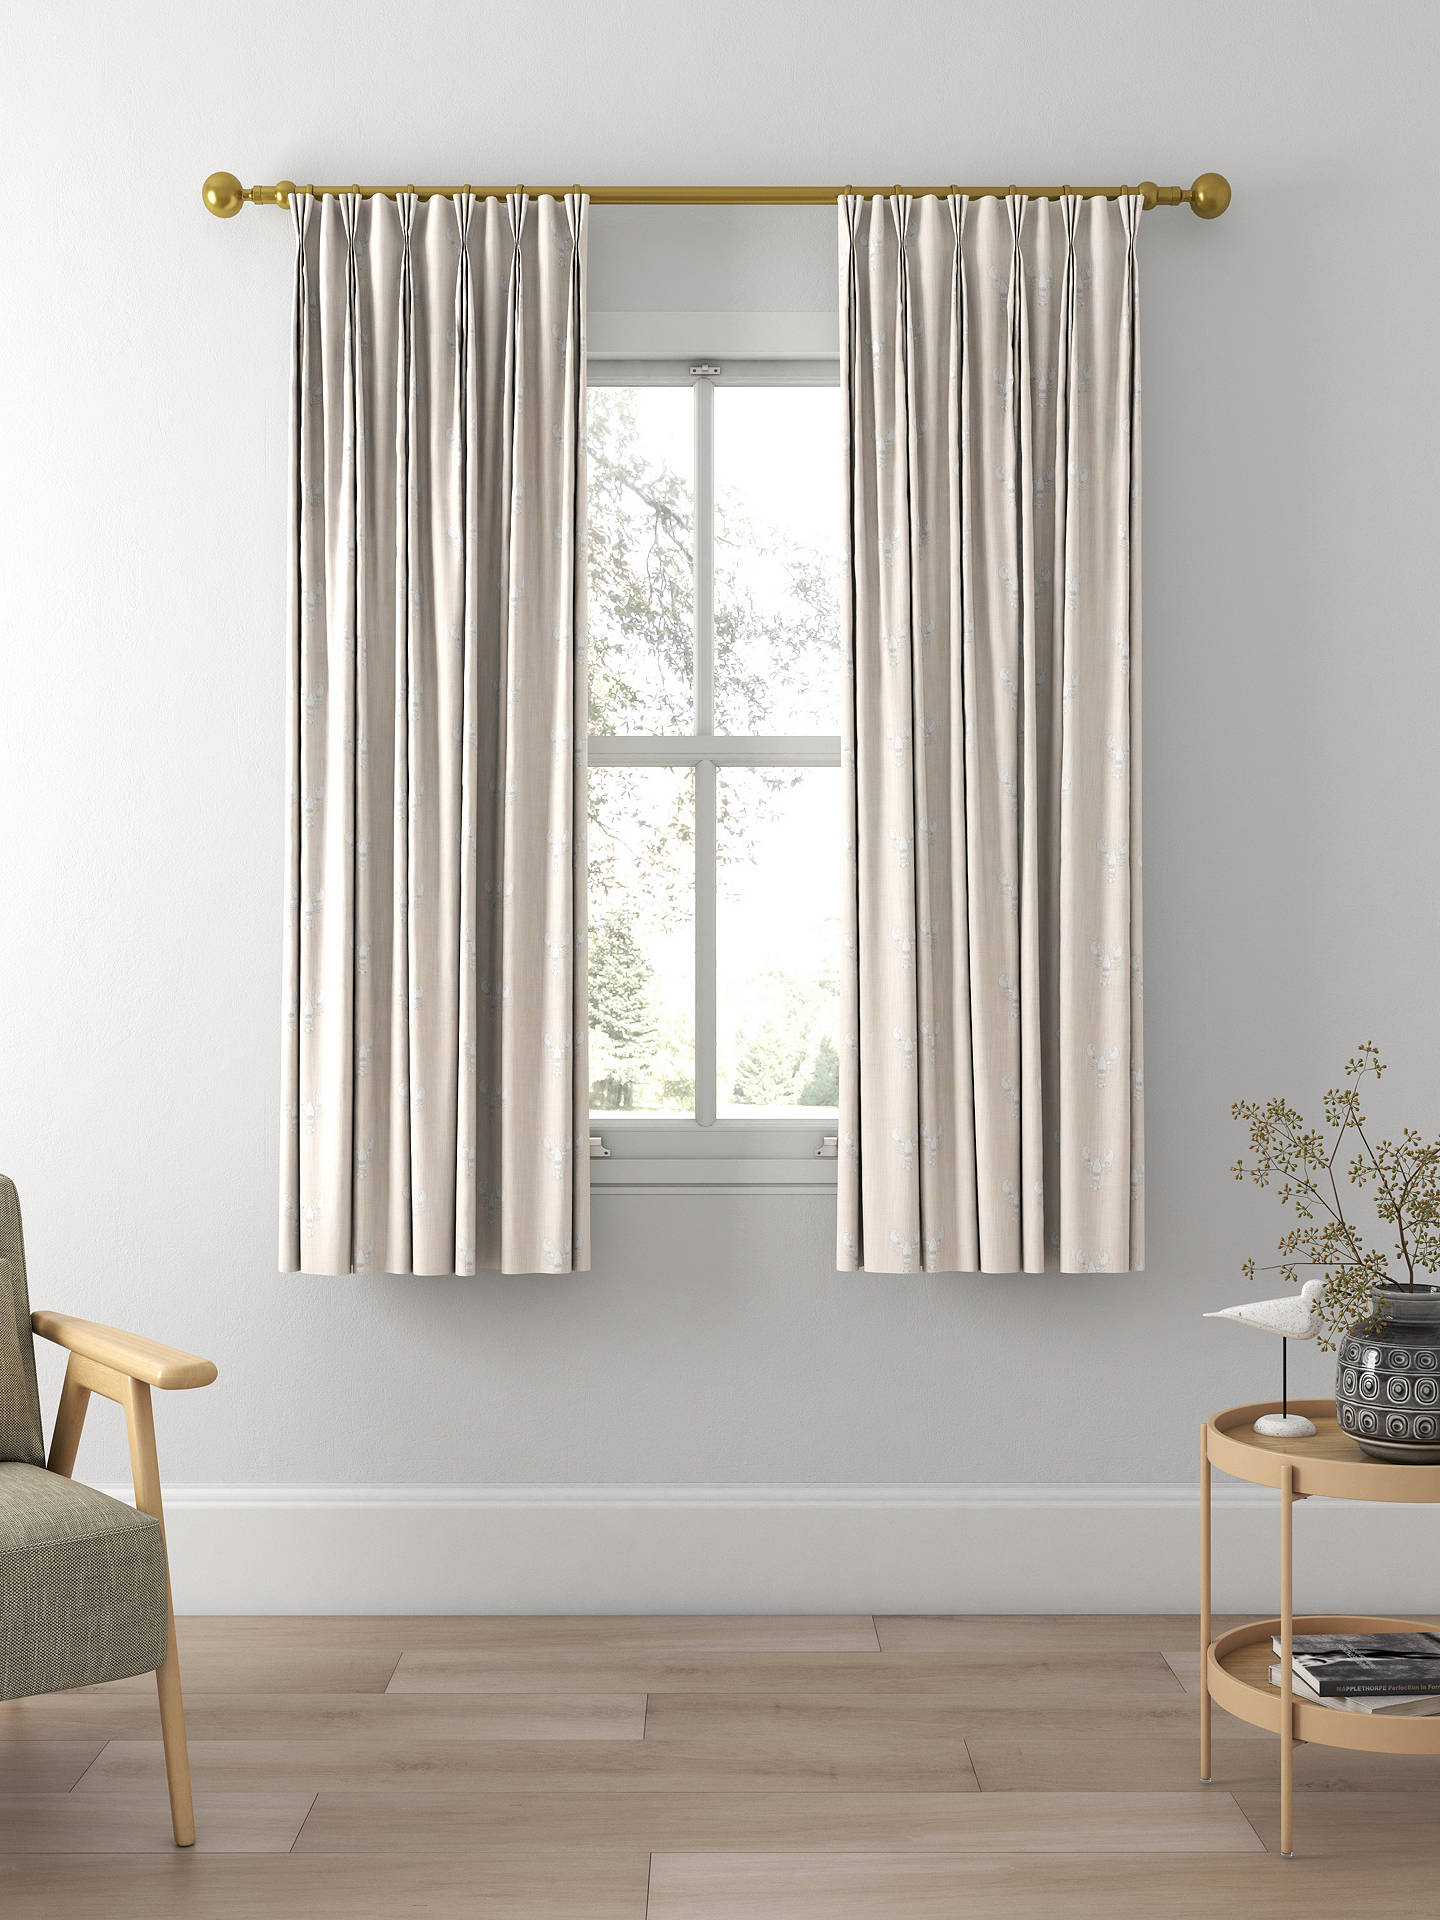 Sanderson Cromer Made to Measure Curtains, Stone